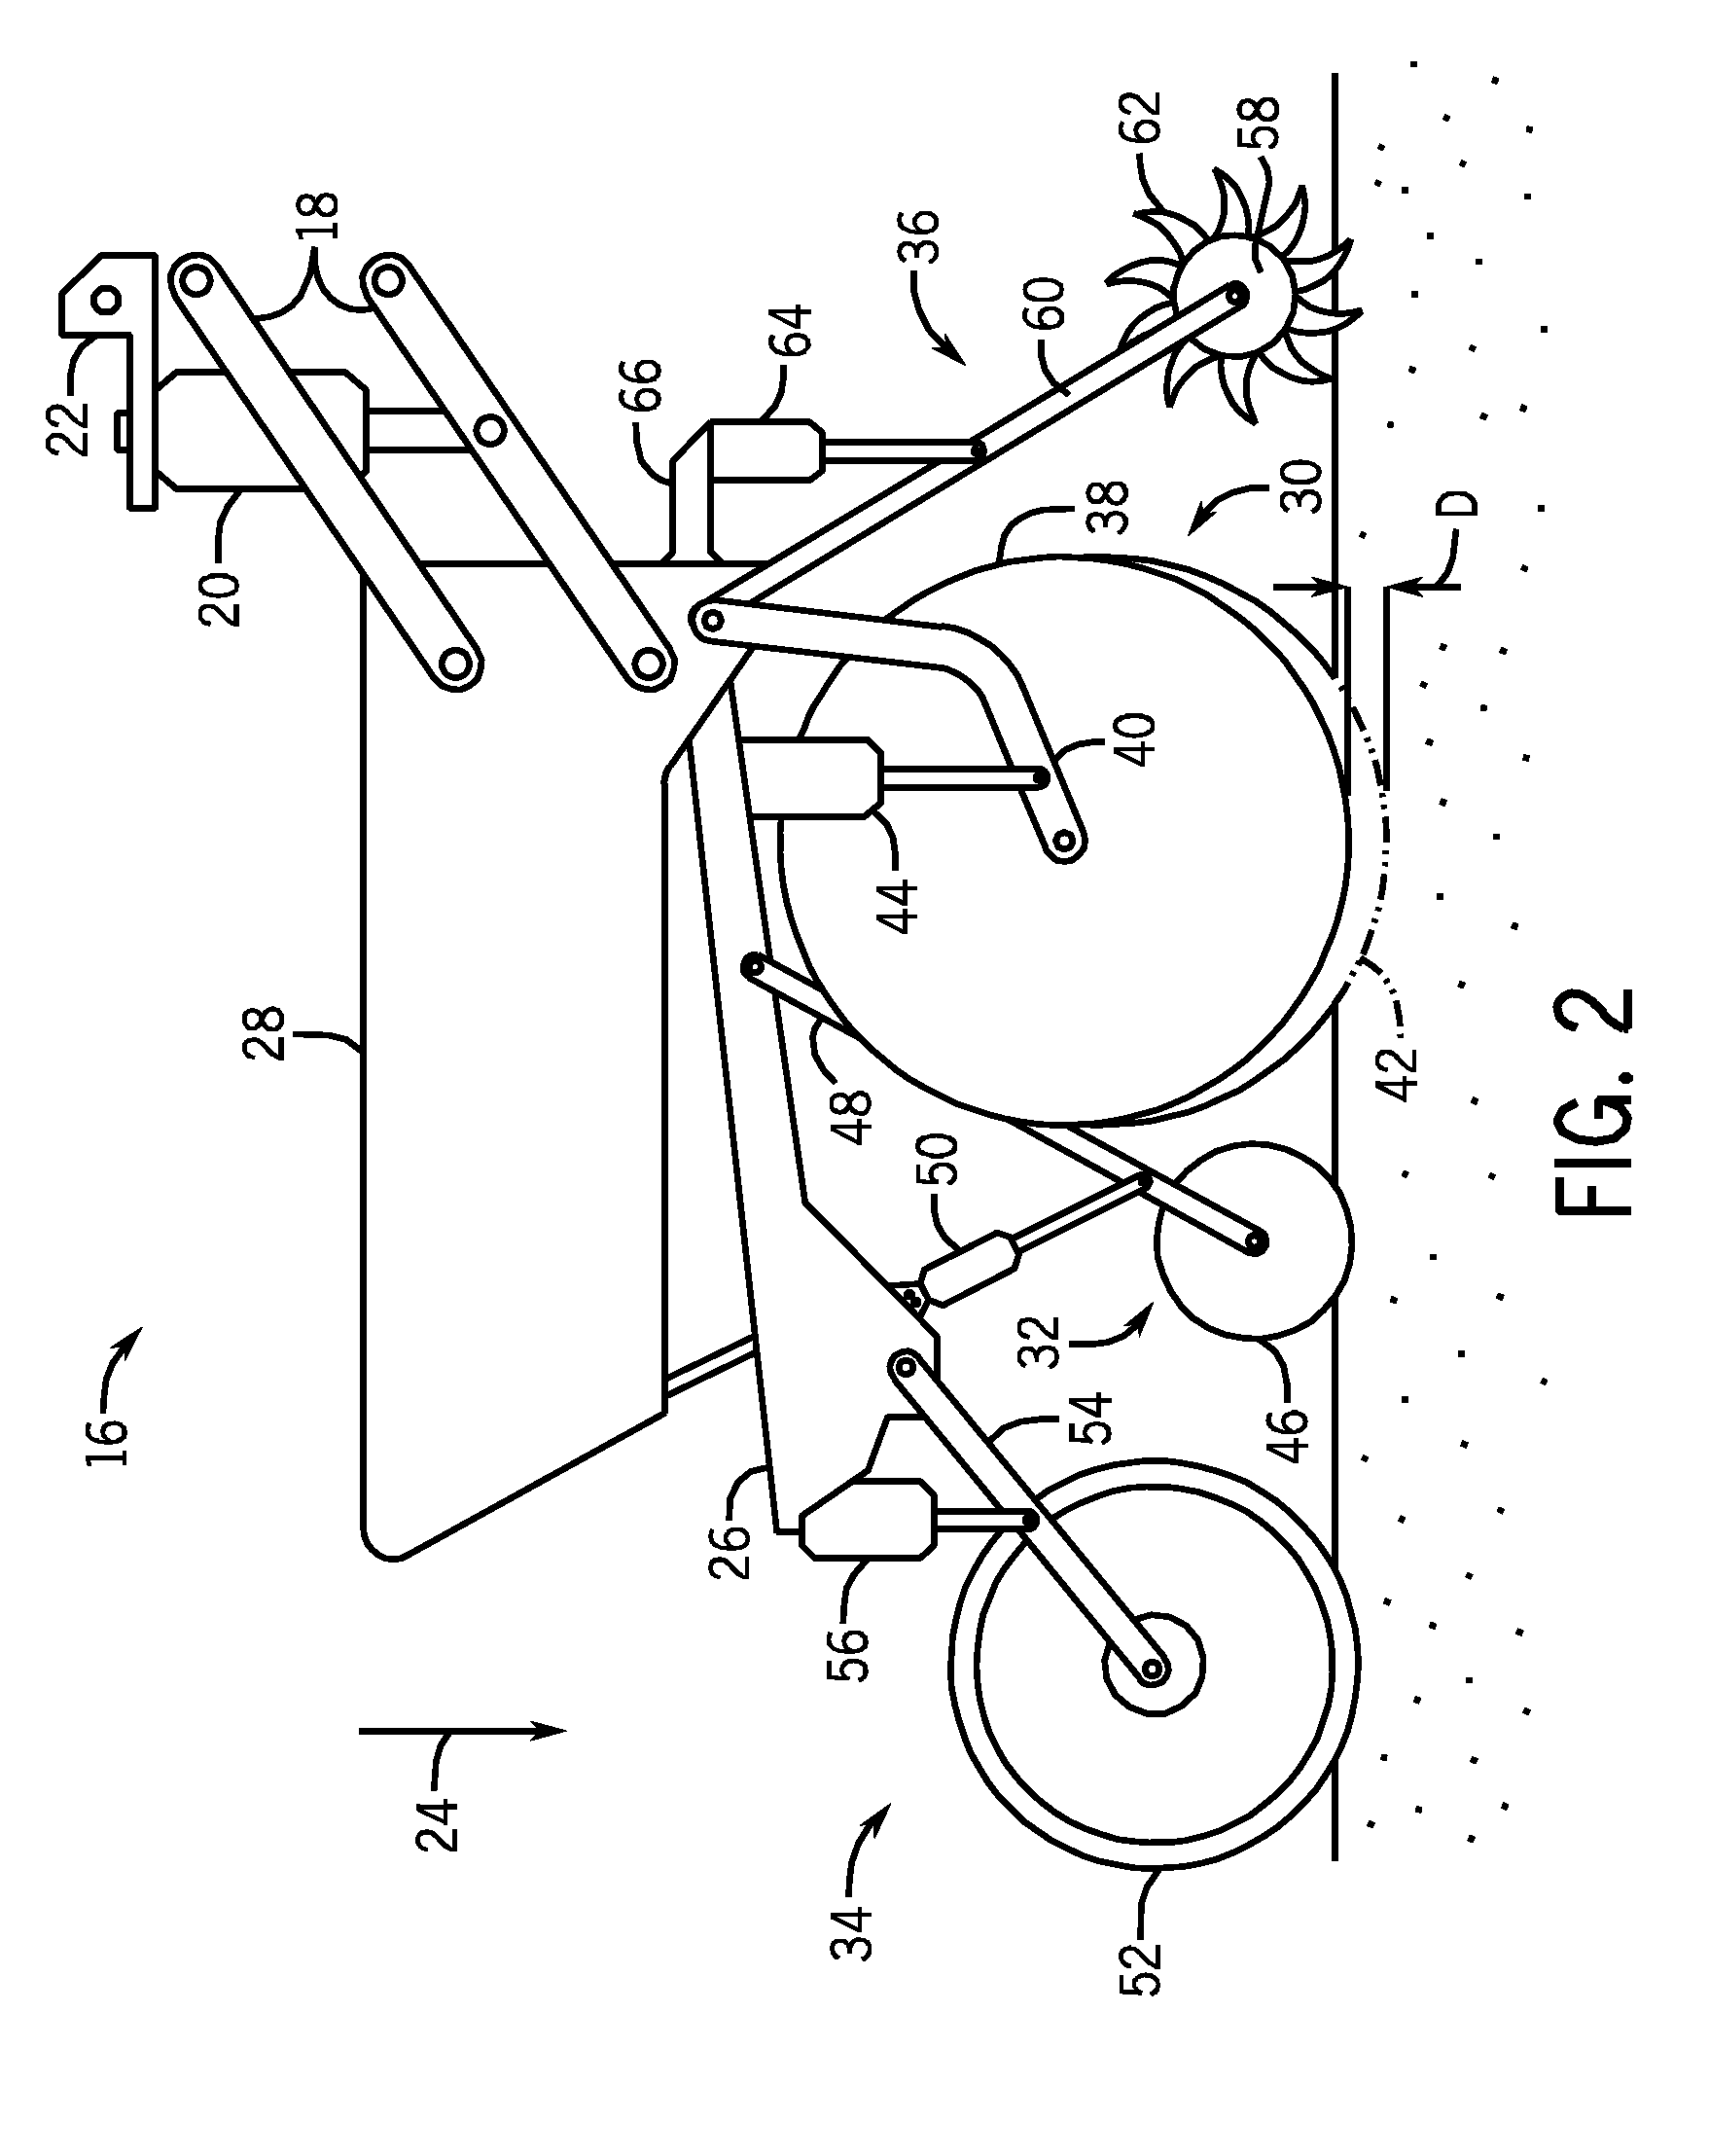 Agricultural implement with combined down force and depth control